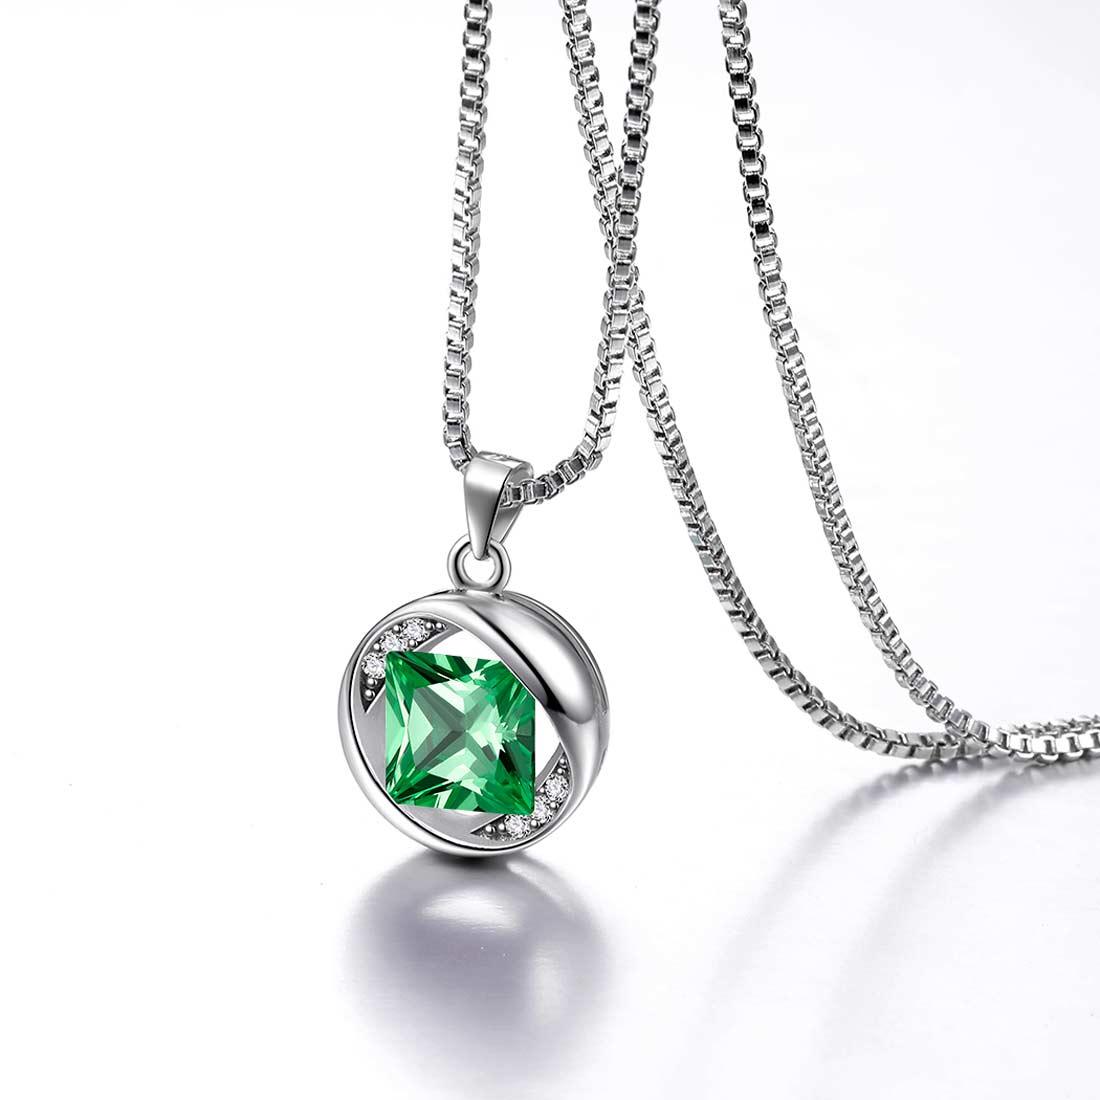 Women Birthstone Pendant Necklaces Sterling Silver - Round - Necklaces - Aurora Tears Jewelry